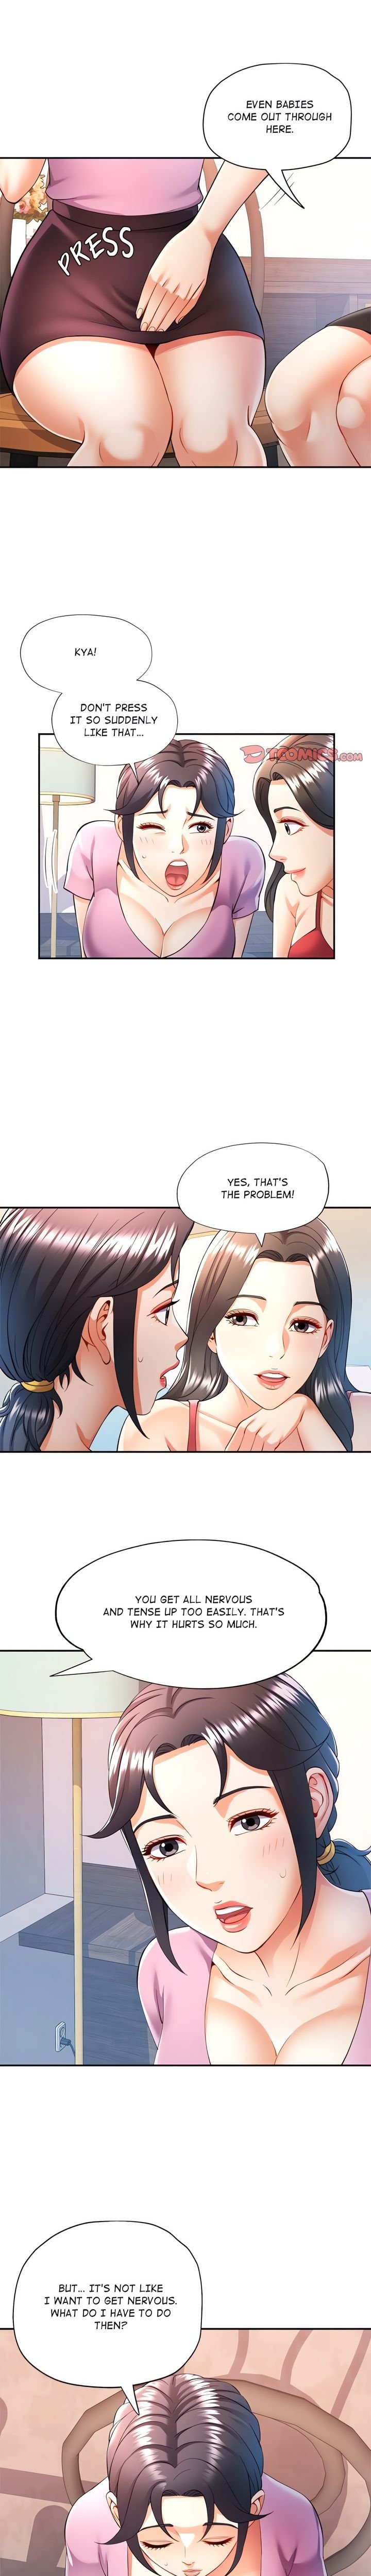 in-her-place-chap-29-0